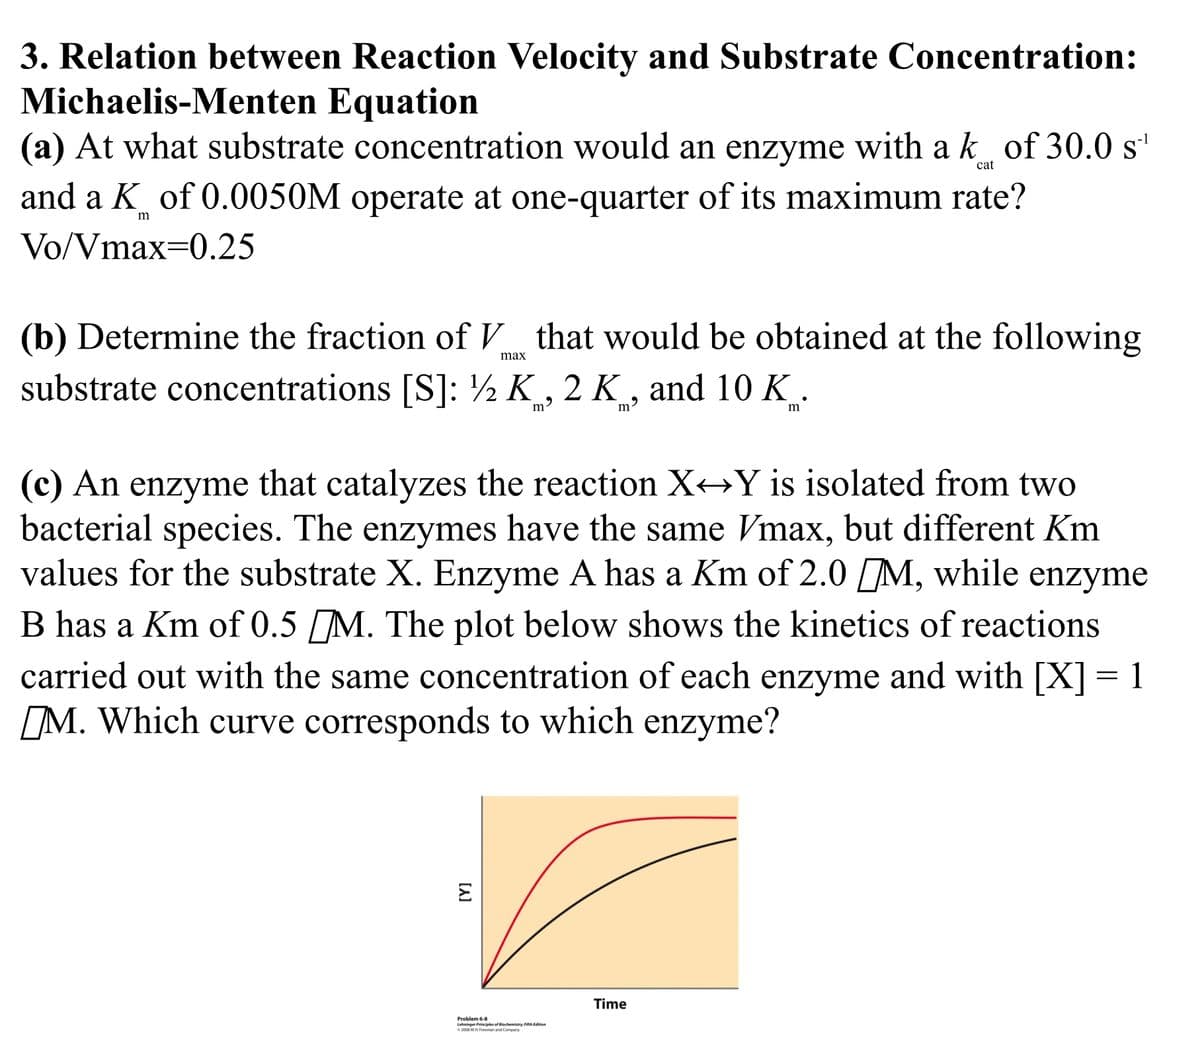 3. Relation between Reaction Velocity and Substrate Concentration:
Michaelis-Menten Equation
(a) At what substrate concentration would an enzyme with a k of 30.0 s¹
cat
and a K of 0.0050M operate at one-quarter of its maximum rate?
m
Vo/Vmax=0.25
(b) Determine the fraction of that would be obtained at the following
substrate concentrations [S]: ½ K, 2 K, and 10 K.
m
max
(c) An enzyme that catalyzes the reaction XY is isolated from two
bacterial species. The enzymes have the same Vmax, but different Km
values for the substrate X. Enzyme A has a Km of 2.0 M, while enzyme
B has a Km of 0.5 M. The plot below shows the kinetics of reactions
carried out with the same concentration of each enzyme and with [X] = 1
M. Which curve corresponds to which enzyme?
[Y]
Problem 6-8
Lehninger Principles of Biochemistry, Fifth Edition
©2008 WH Freeman and Company
Time